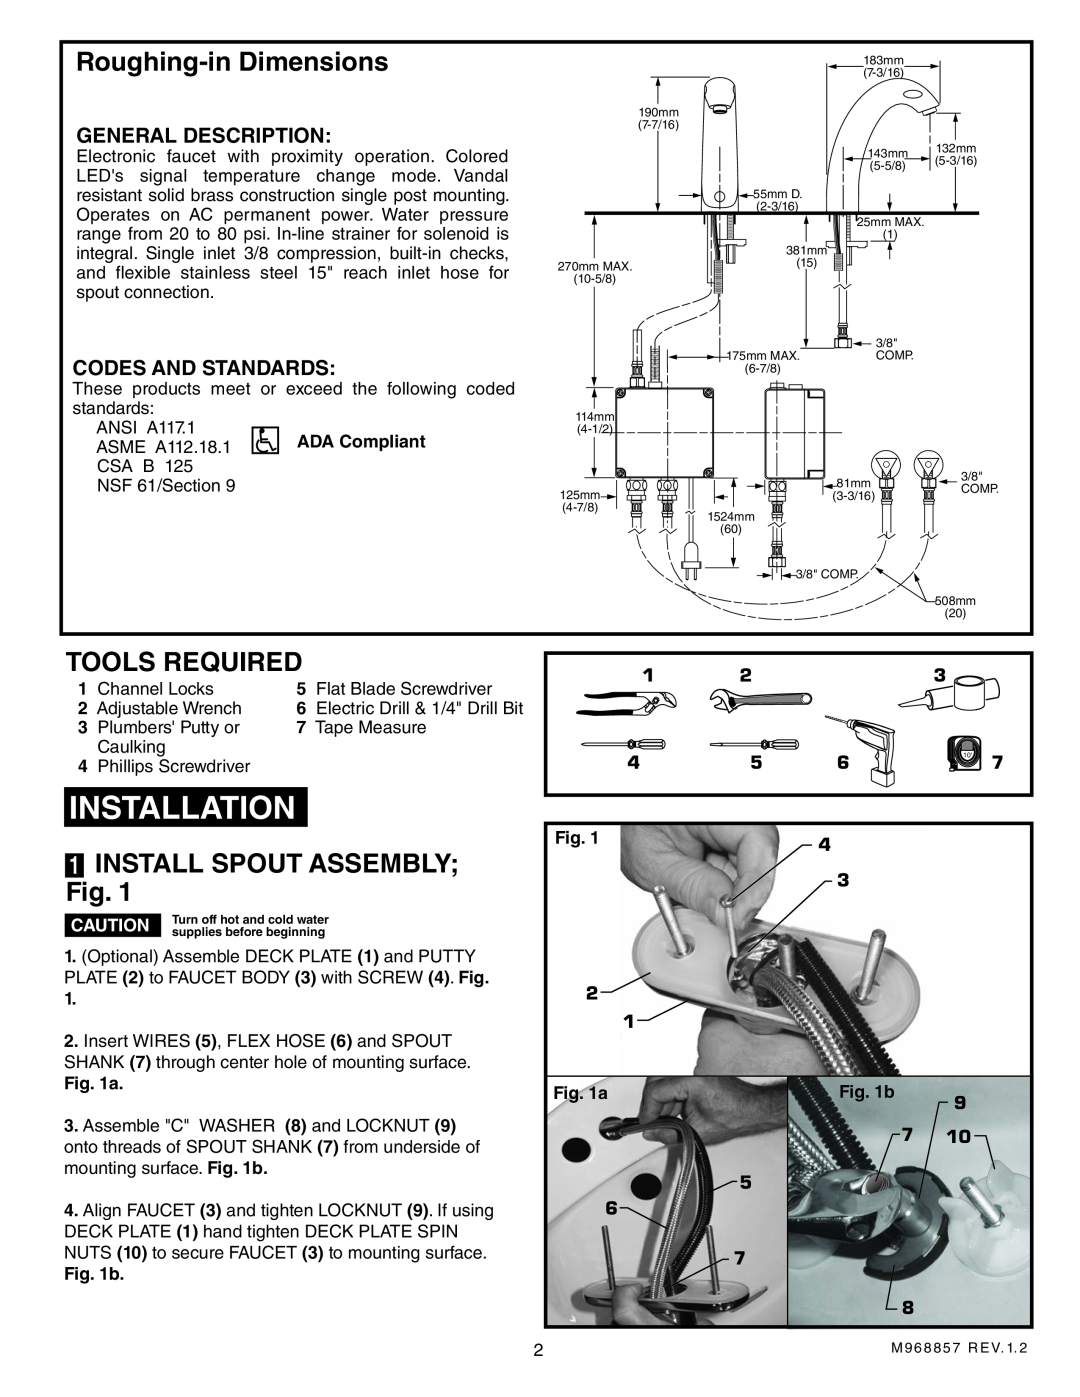 American Standard 6058.105, 6058.102 Installation, Roughing-inDimensions, Tools Required, 1INSTALL SPOUT ASSEMBLY Fig 